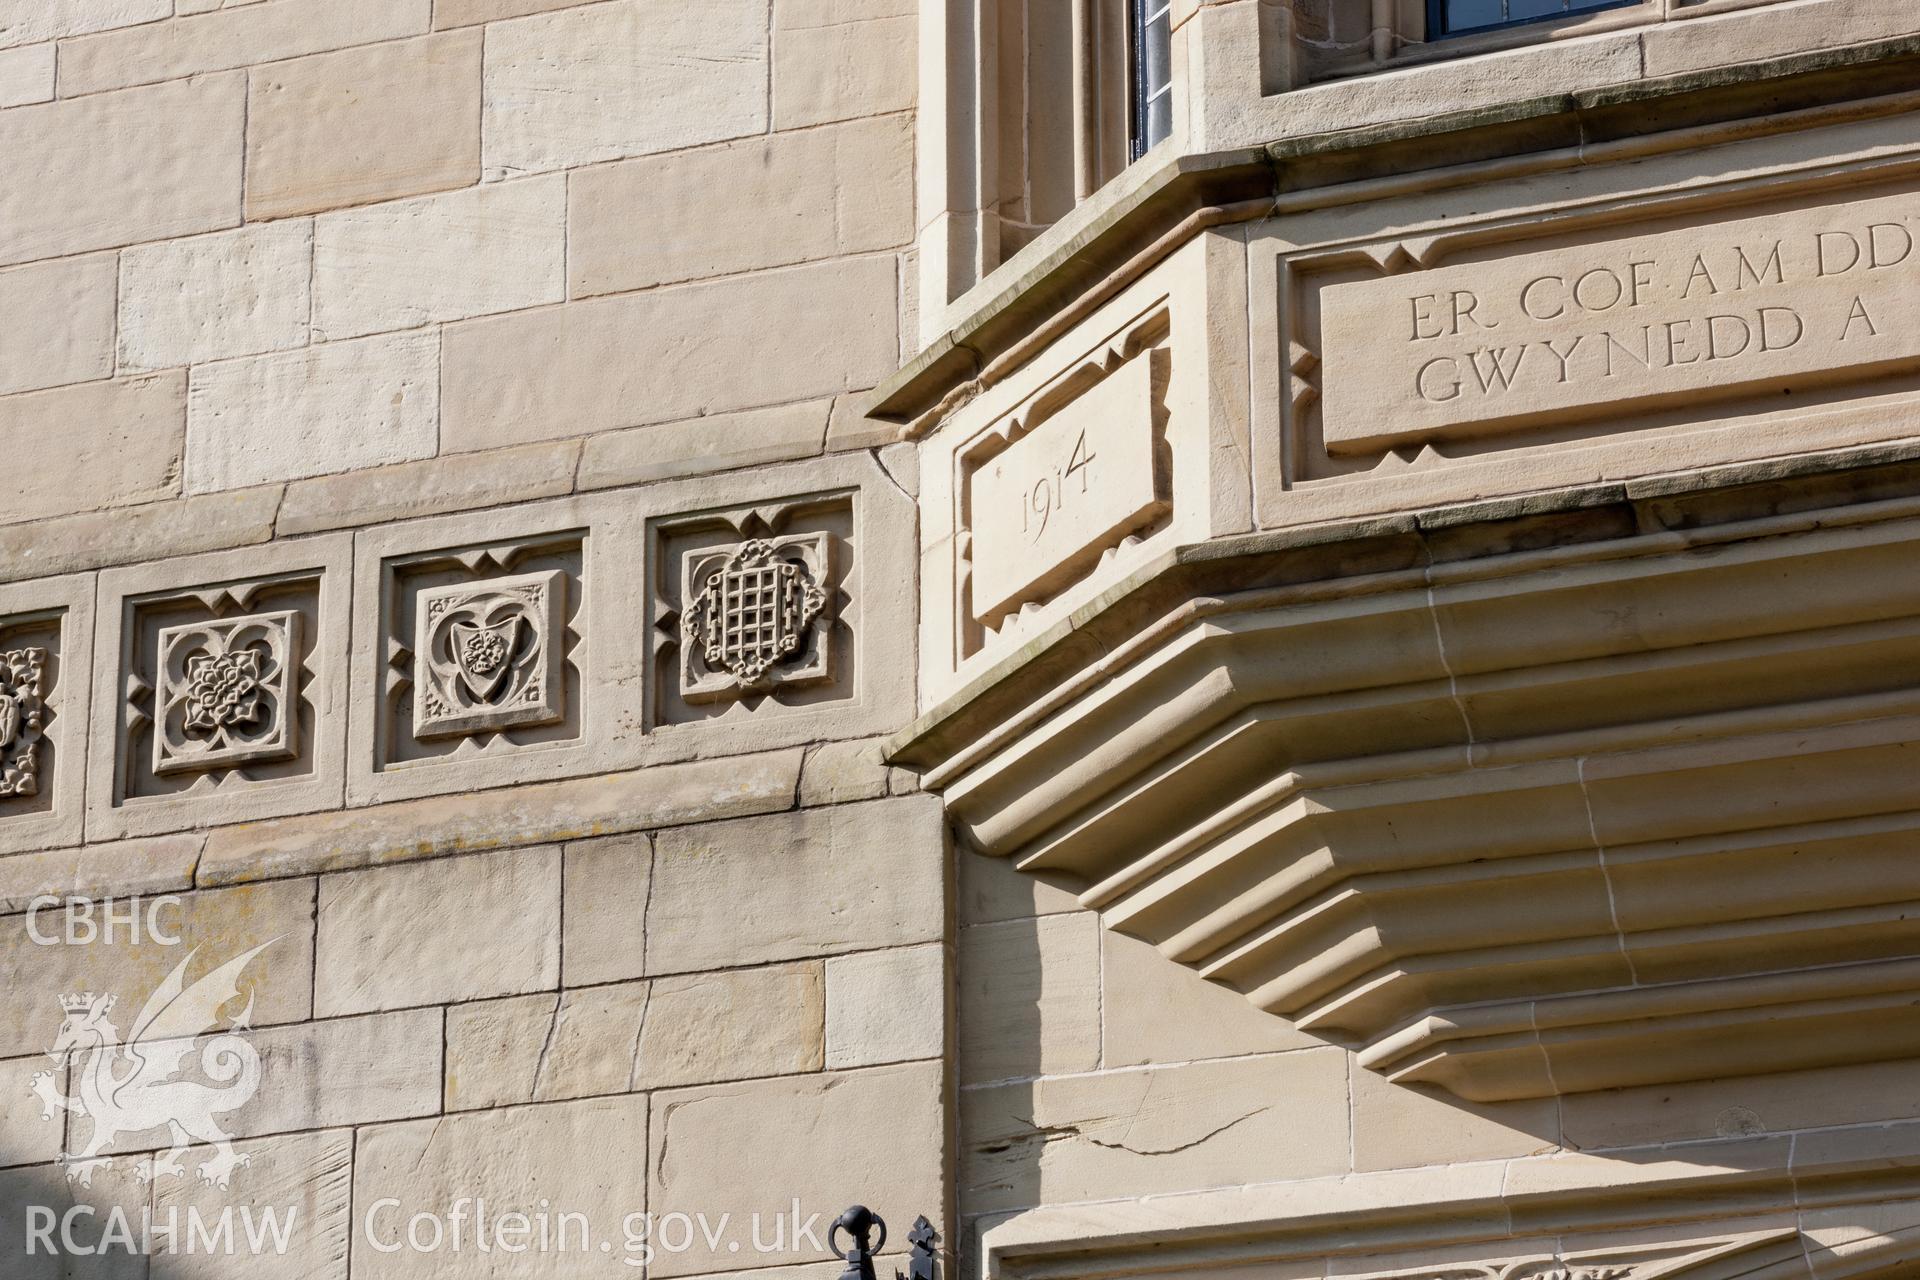 Detail of lettering and ornamentation